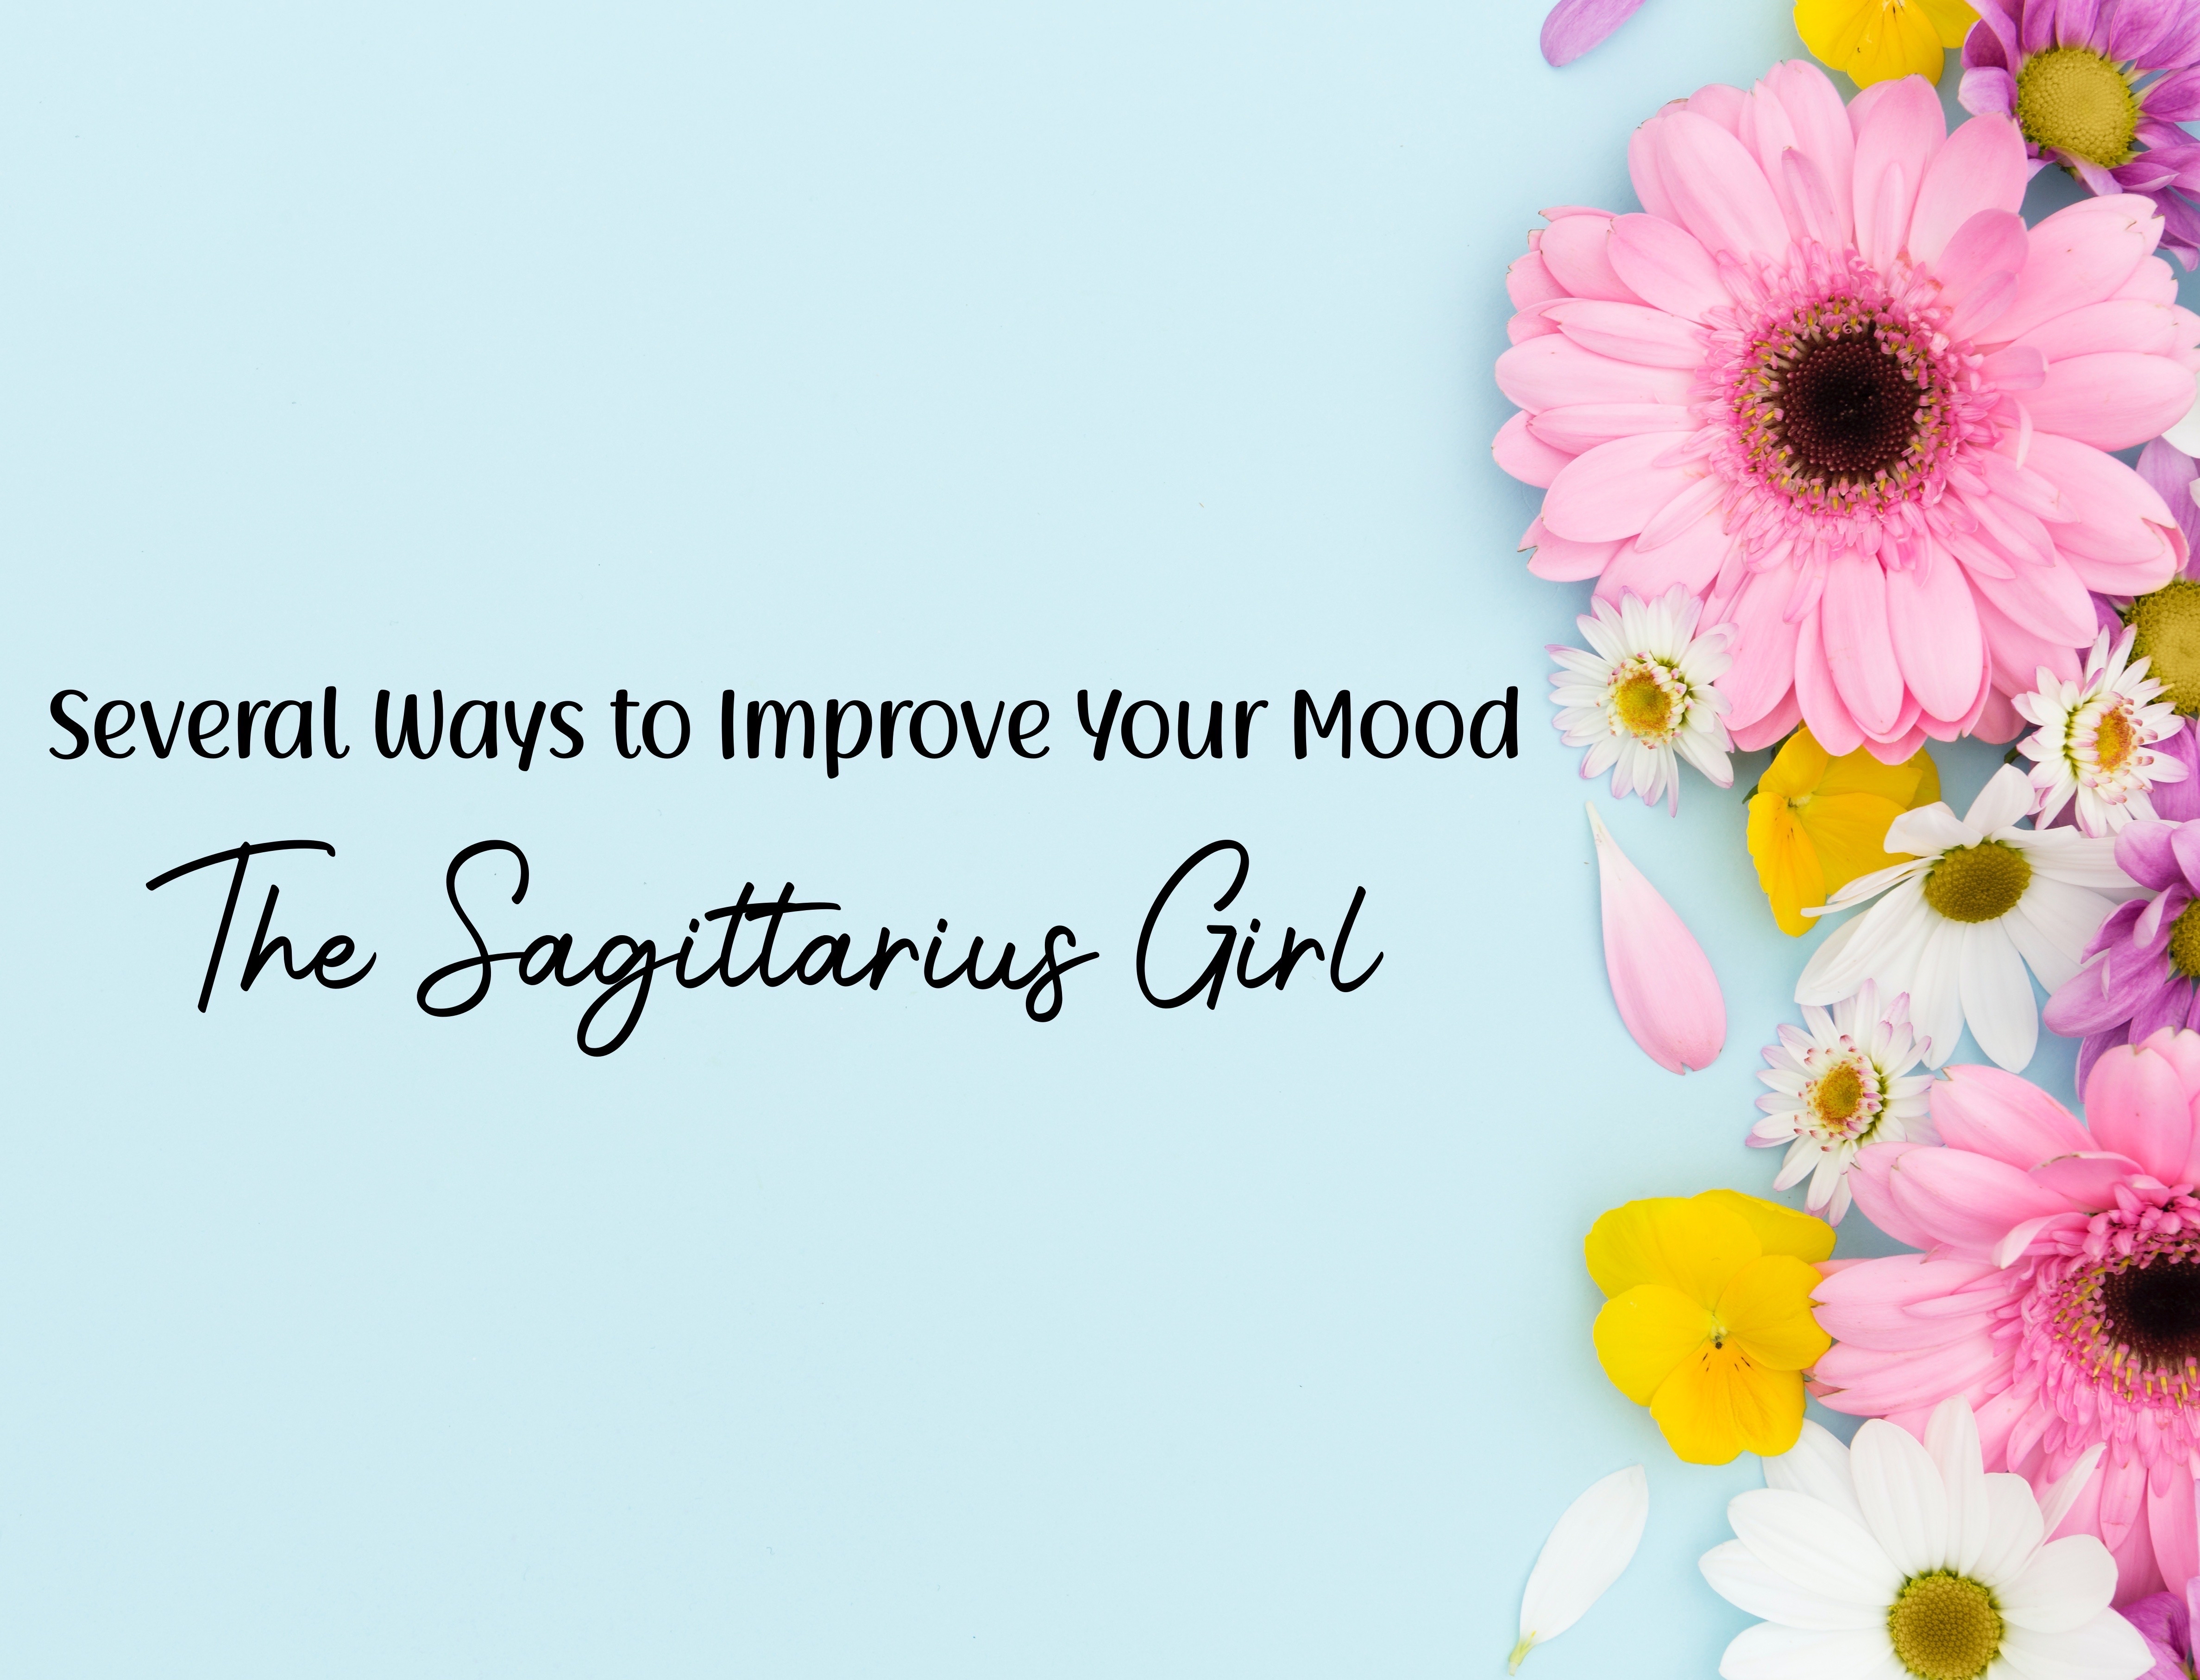 Several Ways to Improve Your Mood